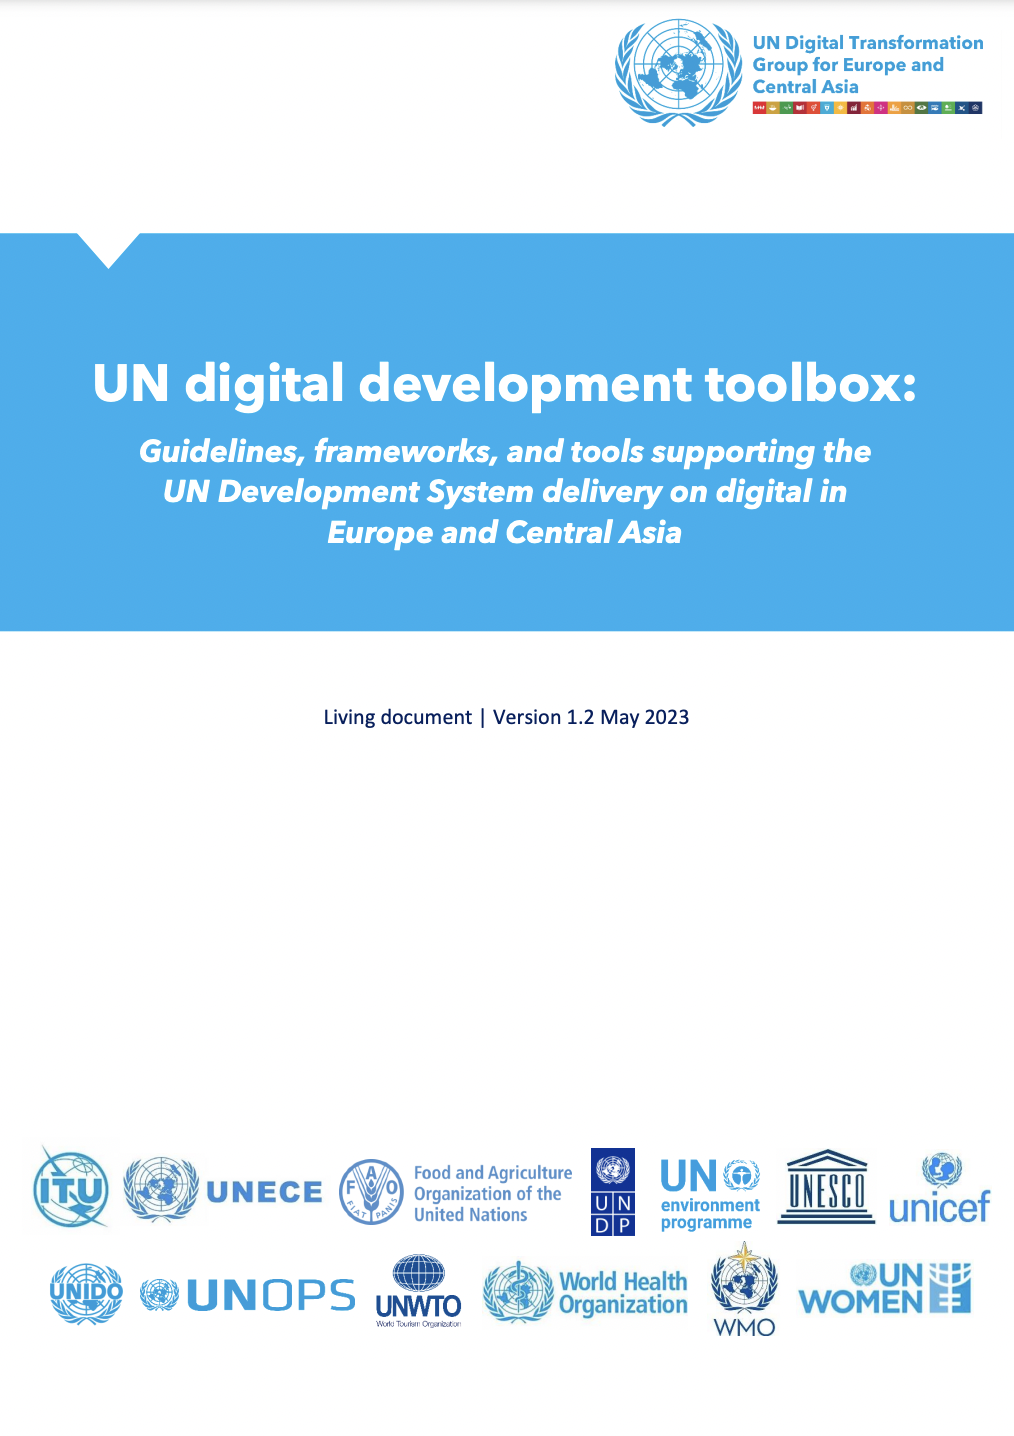 Compilation UN policy guidelines toolkit framework digital transformation for un country teams Europe Central Asia (New Version)